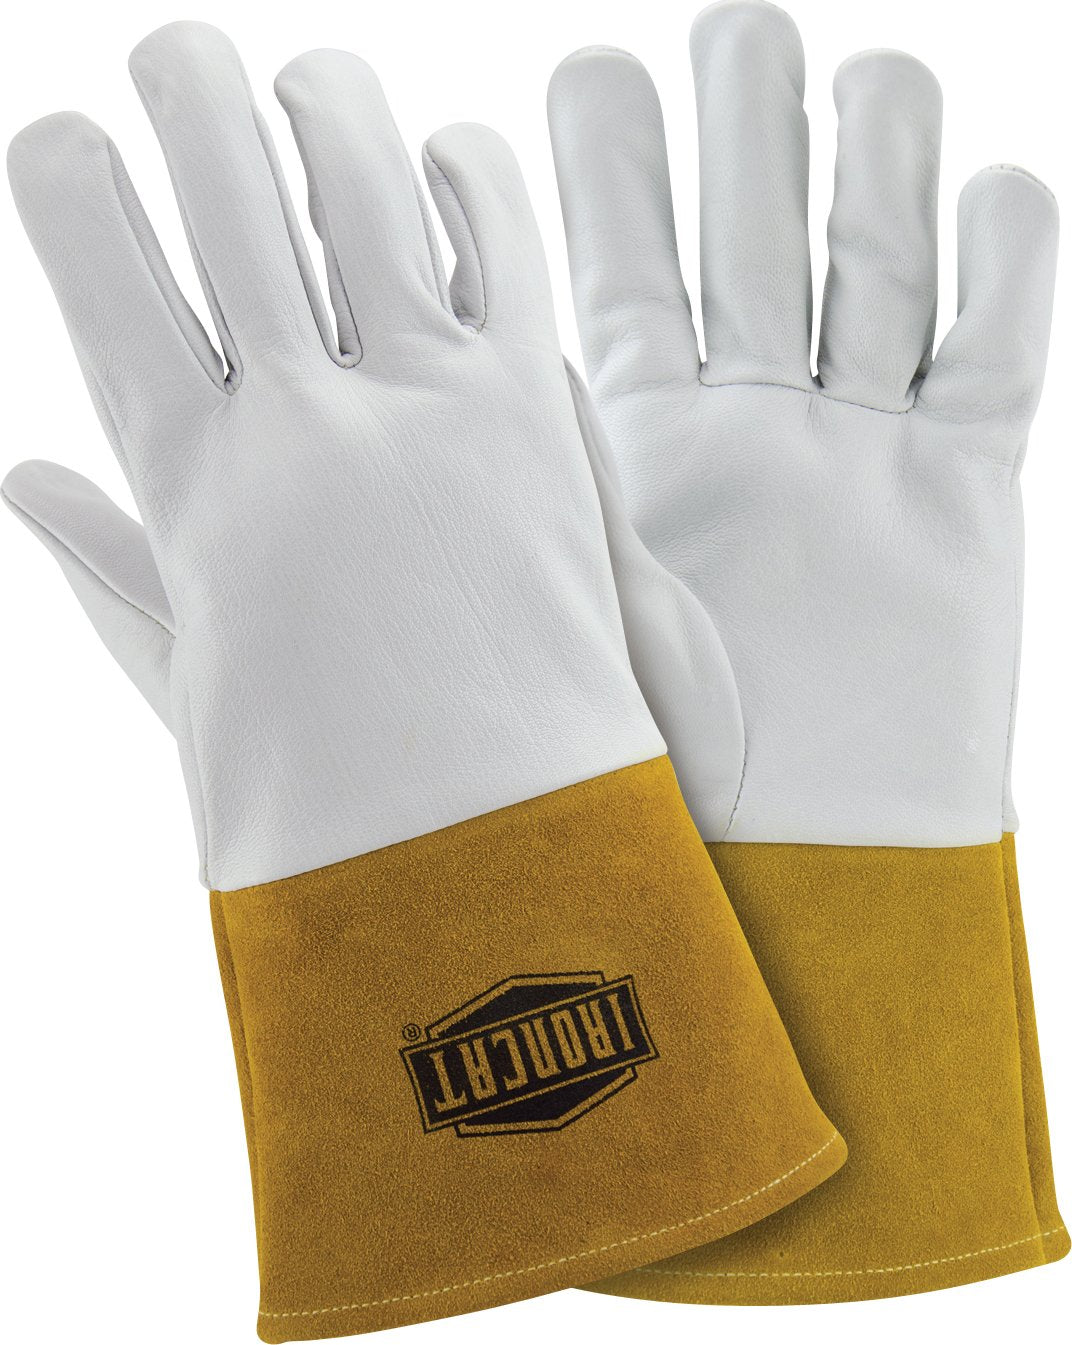 West Chester IRONCAT 6141 Kidskin TIG Welding Gloves - 2XL, Kevlar Thread Welding Gloves with 4 in. Gold Cuff, Straight Thumb